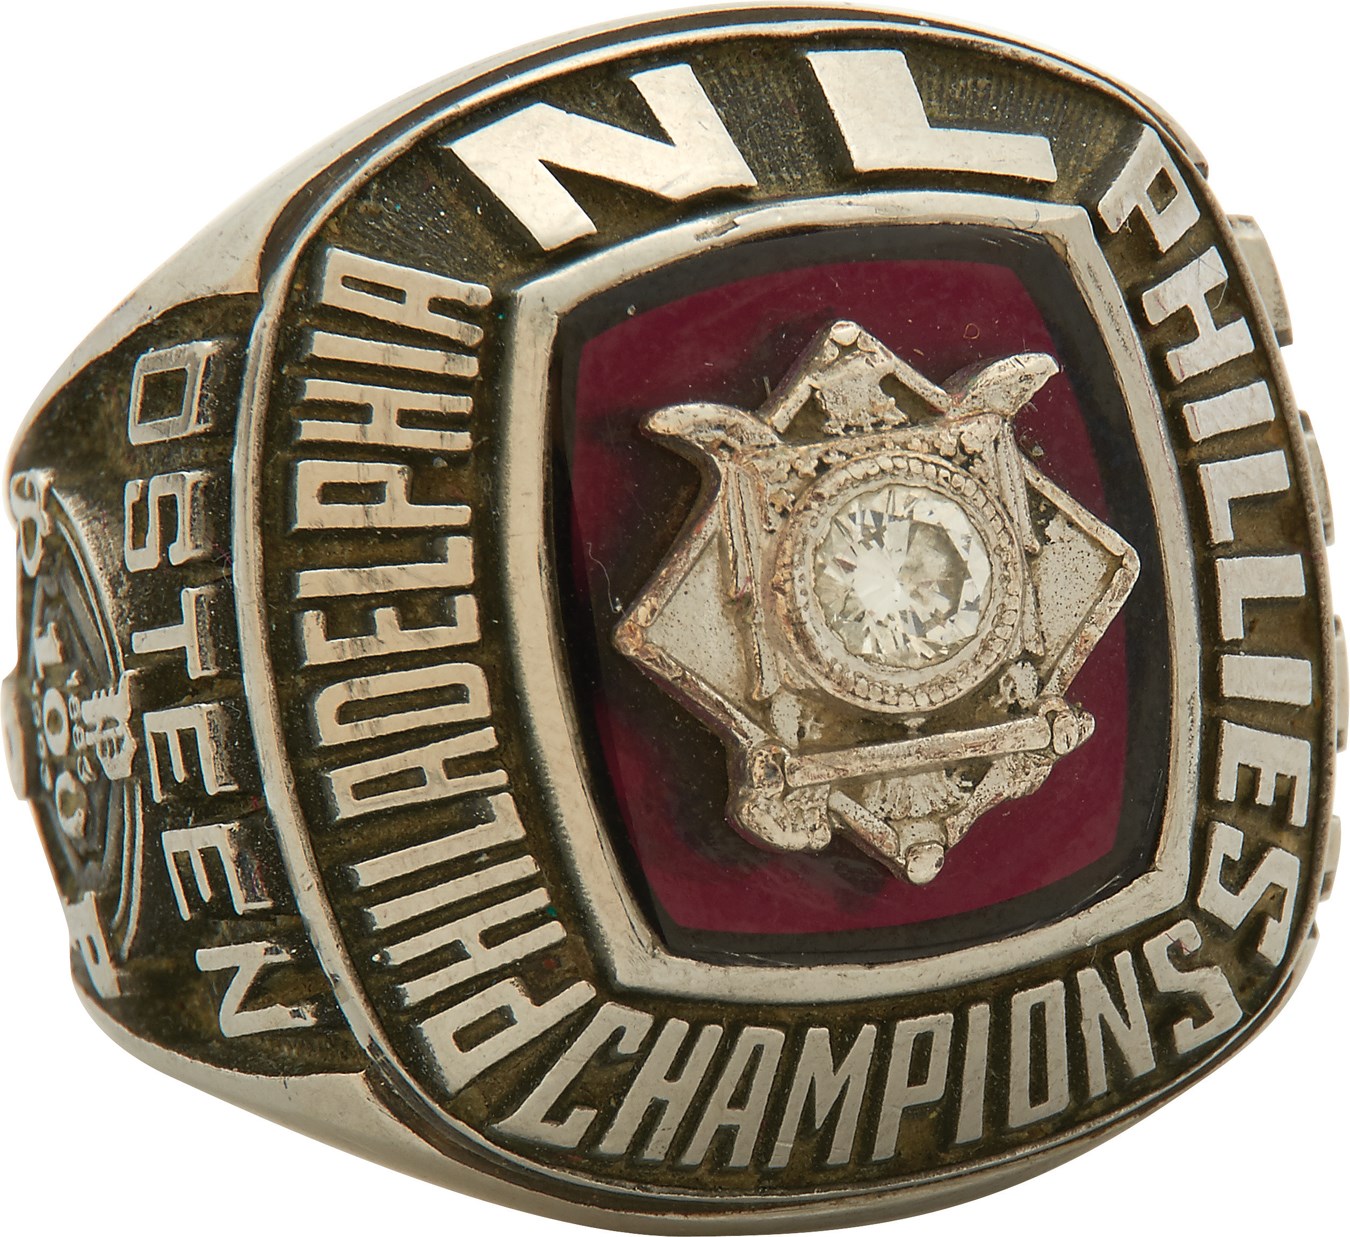 Sports Rings And Awards - 1983 Claude Osteen Philadelphia Phillies National League Championship Ring